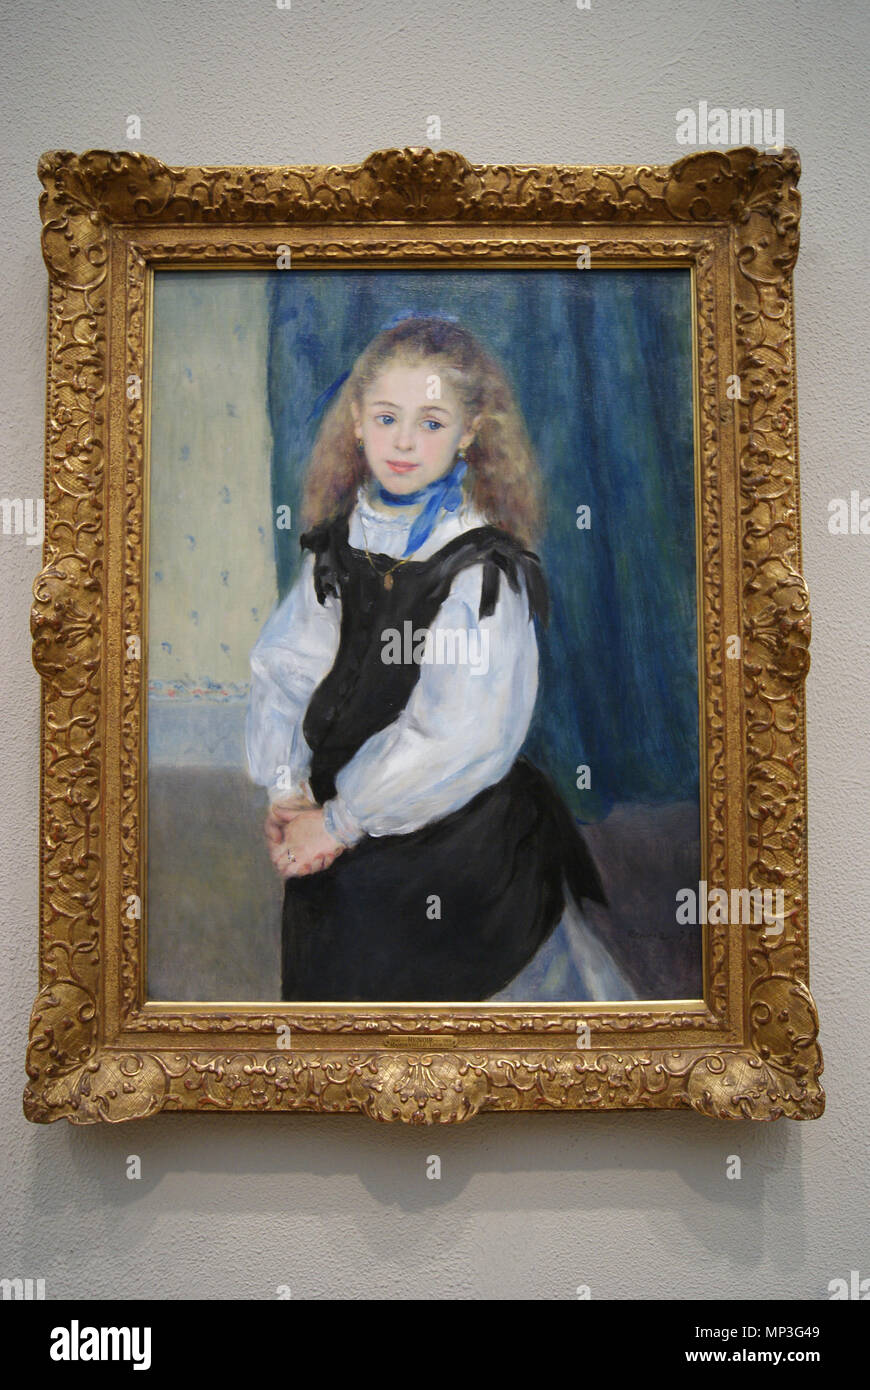 Portrait of Mademoiselle Legrand.  English: A portrait of eight-year-old Adelphine Legrand. Not much is known about how Renoir came to produce the painting or the relationship between him and the Legrand family, although he seems to have been a close family friend since he attended Adelphine's wedding in 1893. It also appears that Adelphine's parents were acquainted with the artists Frédéric Bazille and Jean-Baptiste Carpeaux. . 1875.   988 Pierre-Auguste Renoir, Portrait of Mademoiselle Legrand (1875) Stock Photo